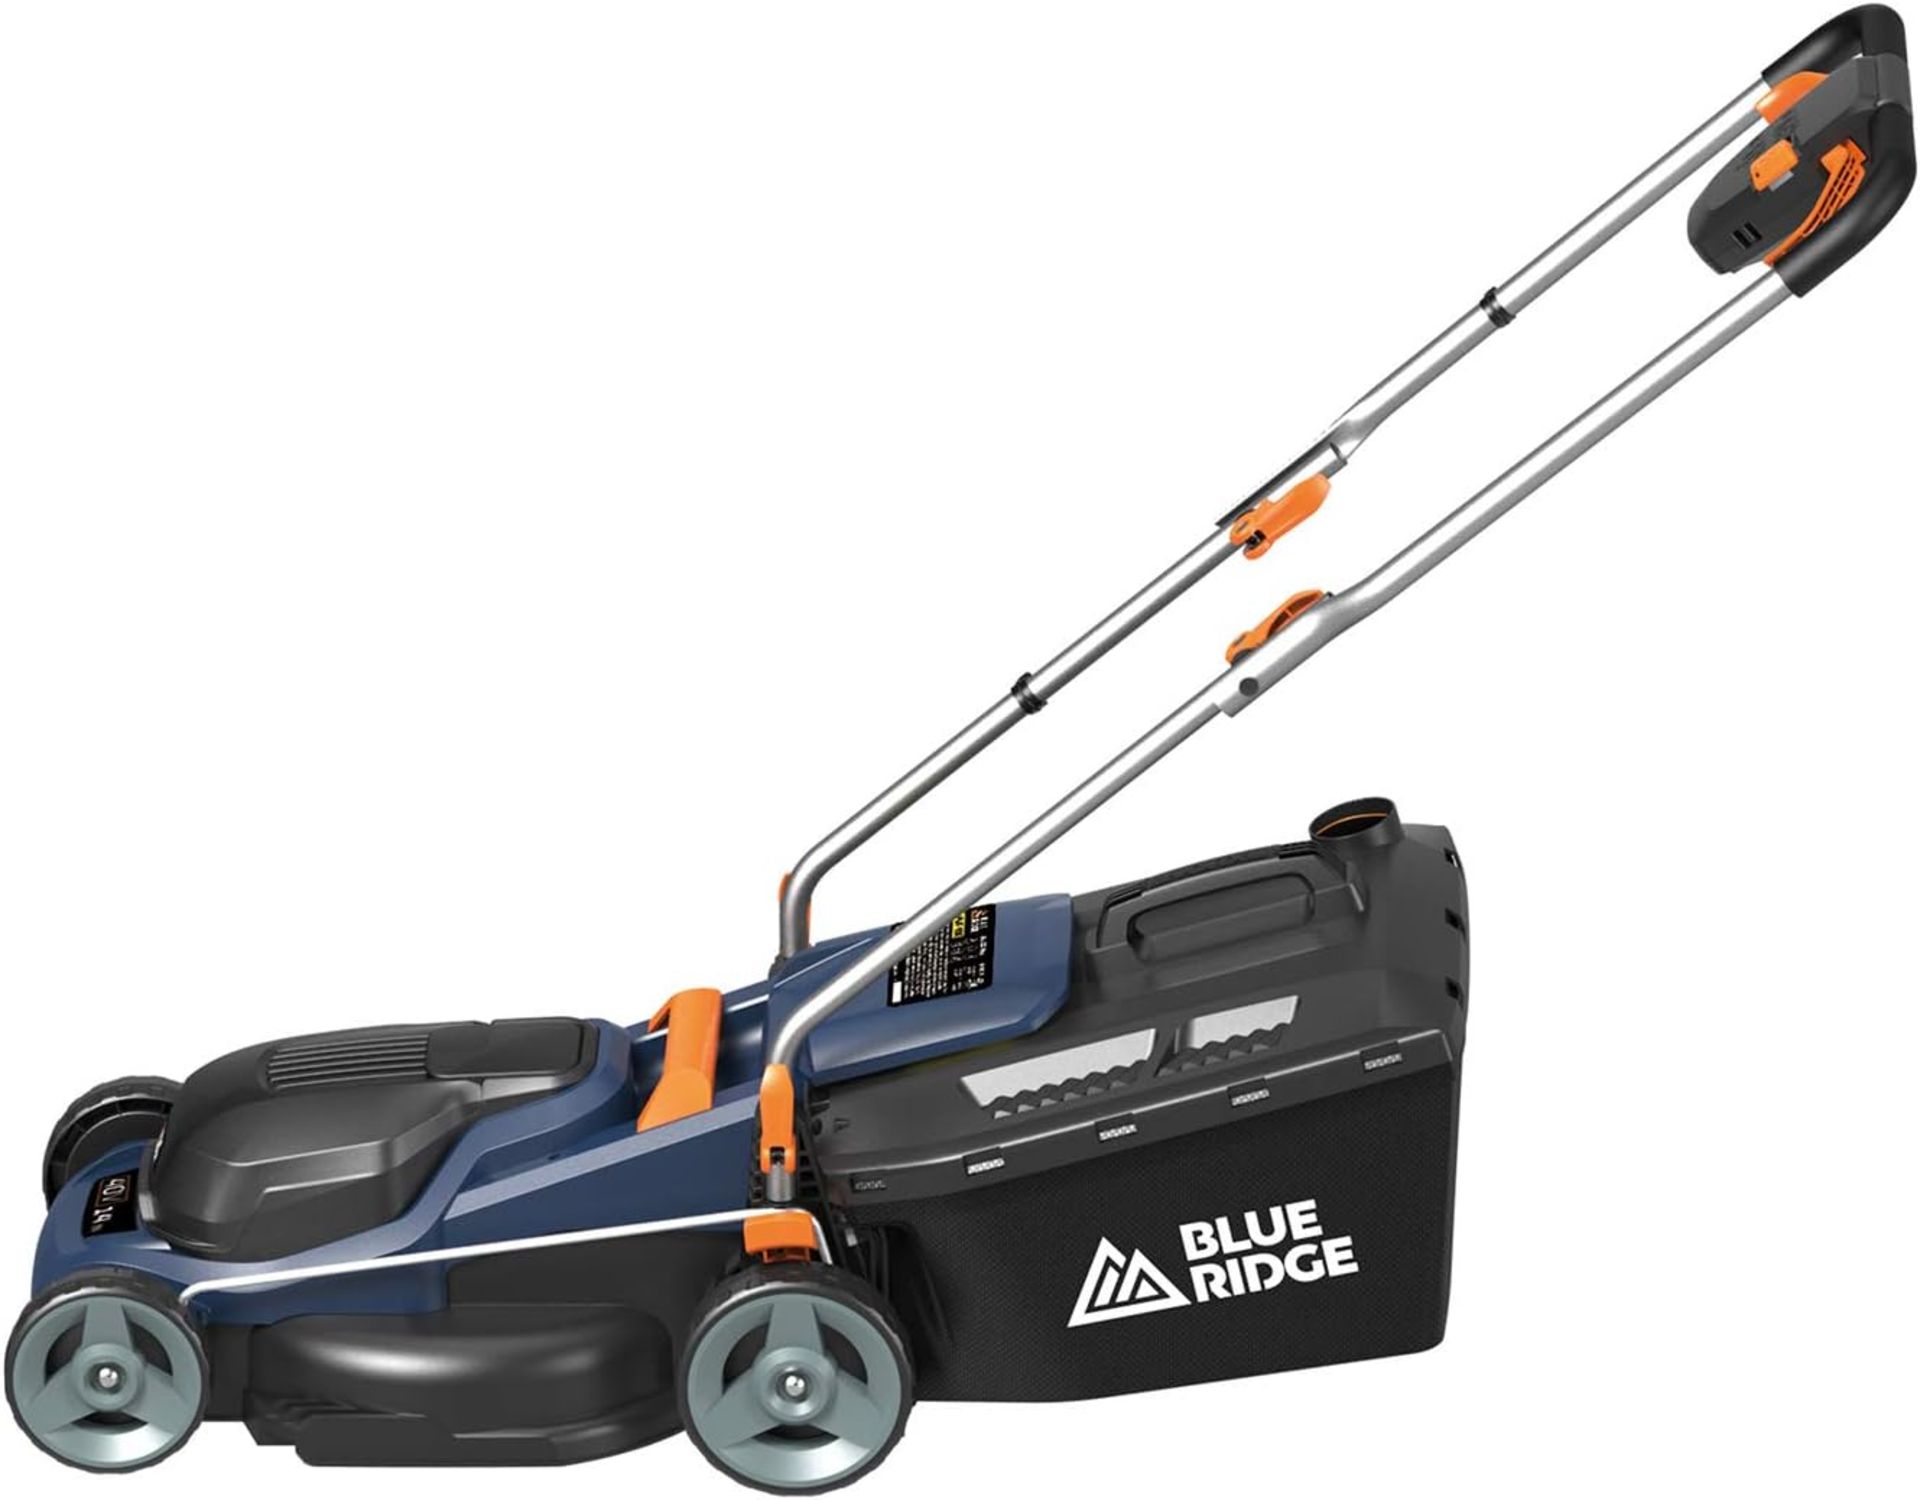 2x NEW & BOXED BLUE RIDGE 36V Cordless Lawnmower with 2.0 Ah Li-ion Battery. RRP £229 EACH. Powerful - Image 3 of 5